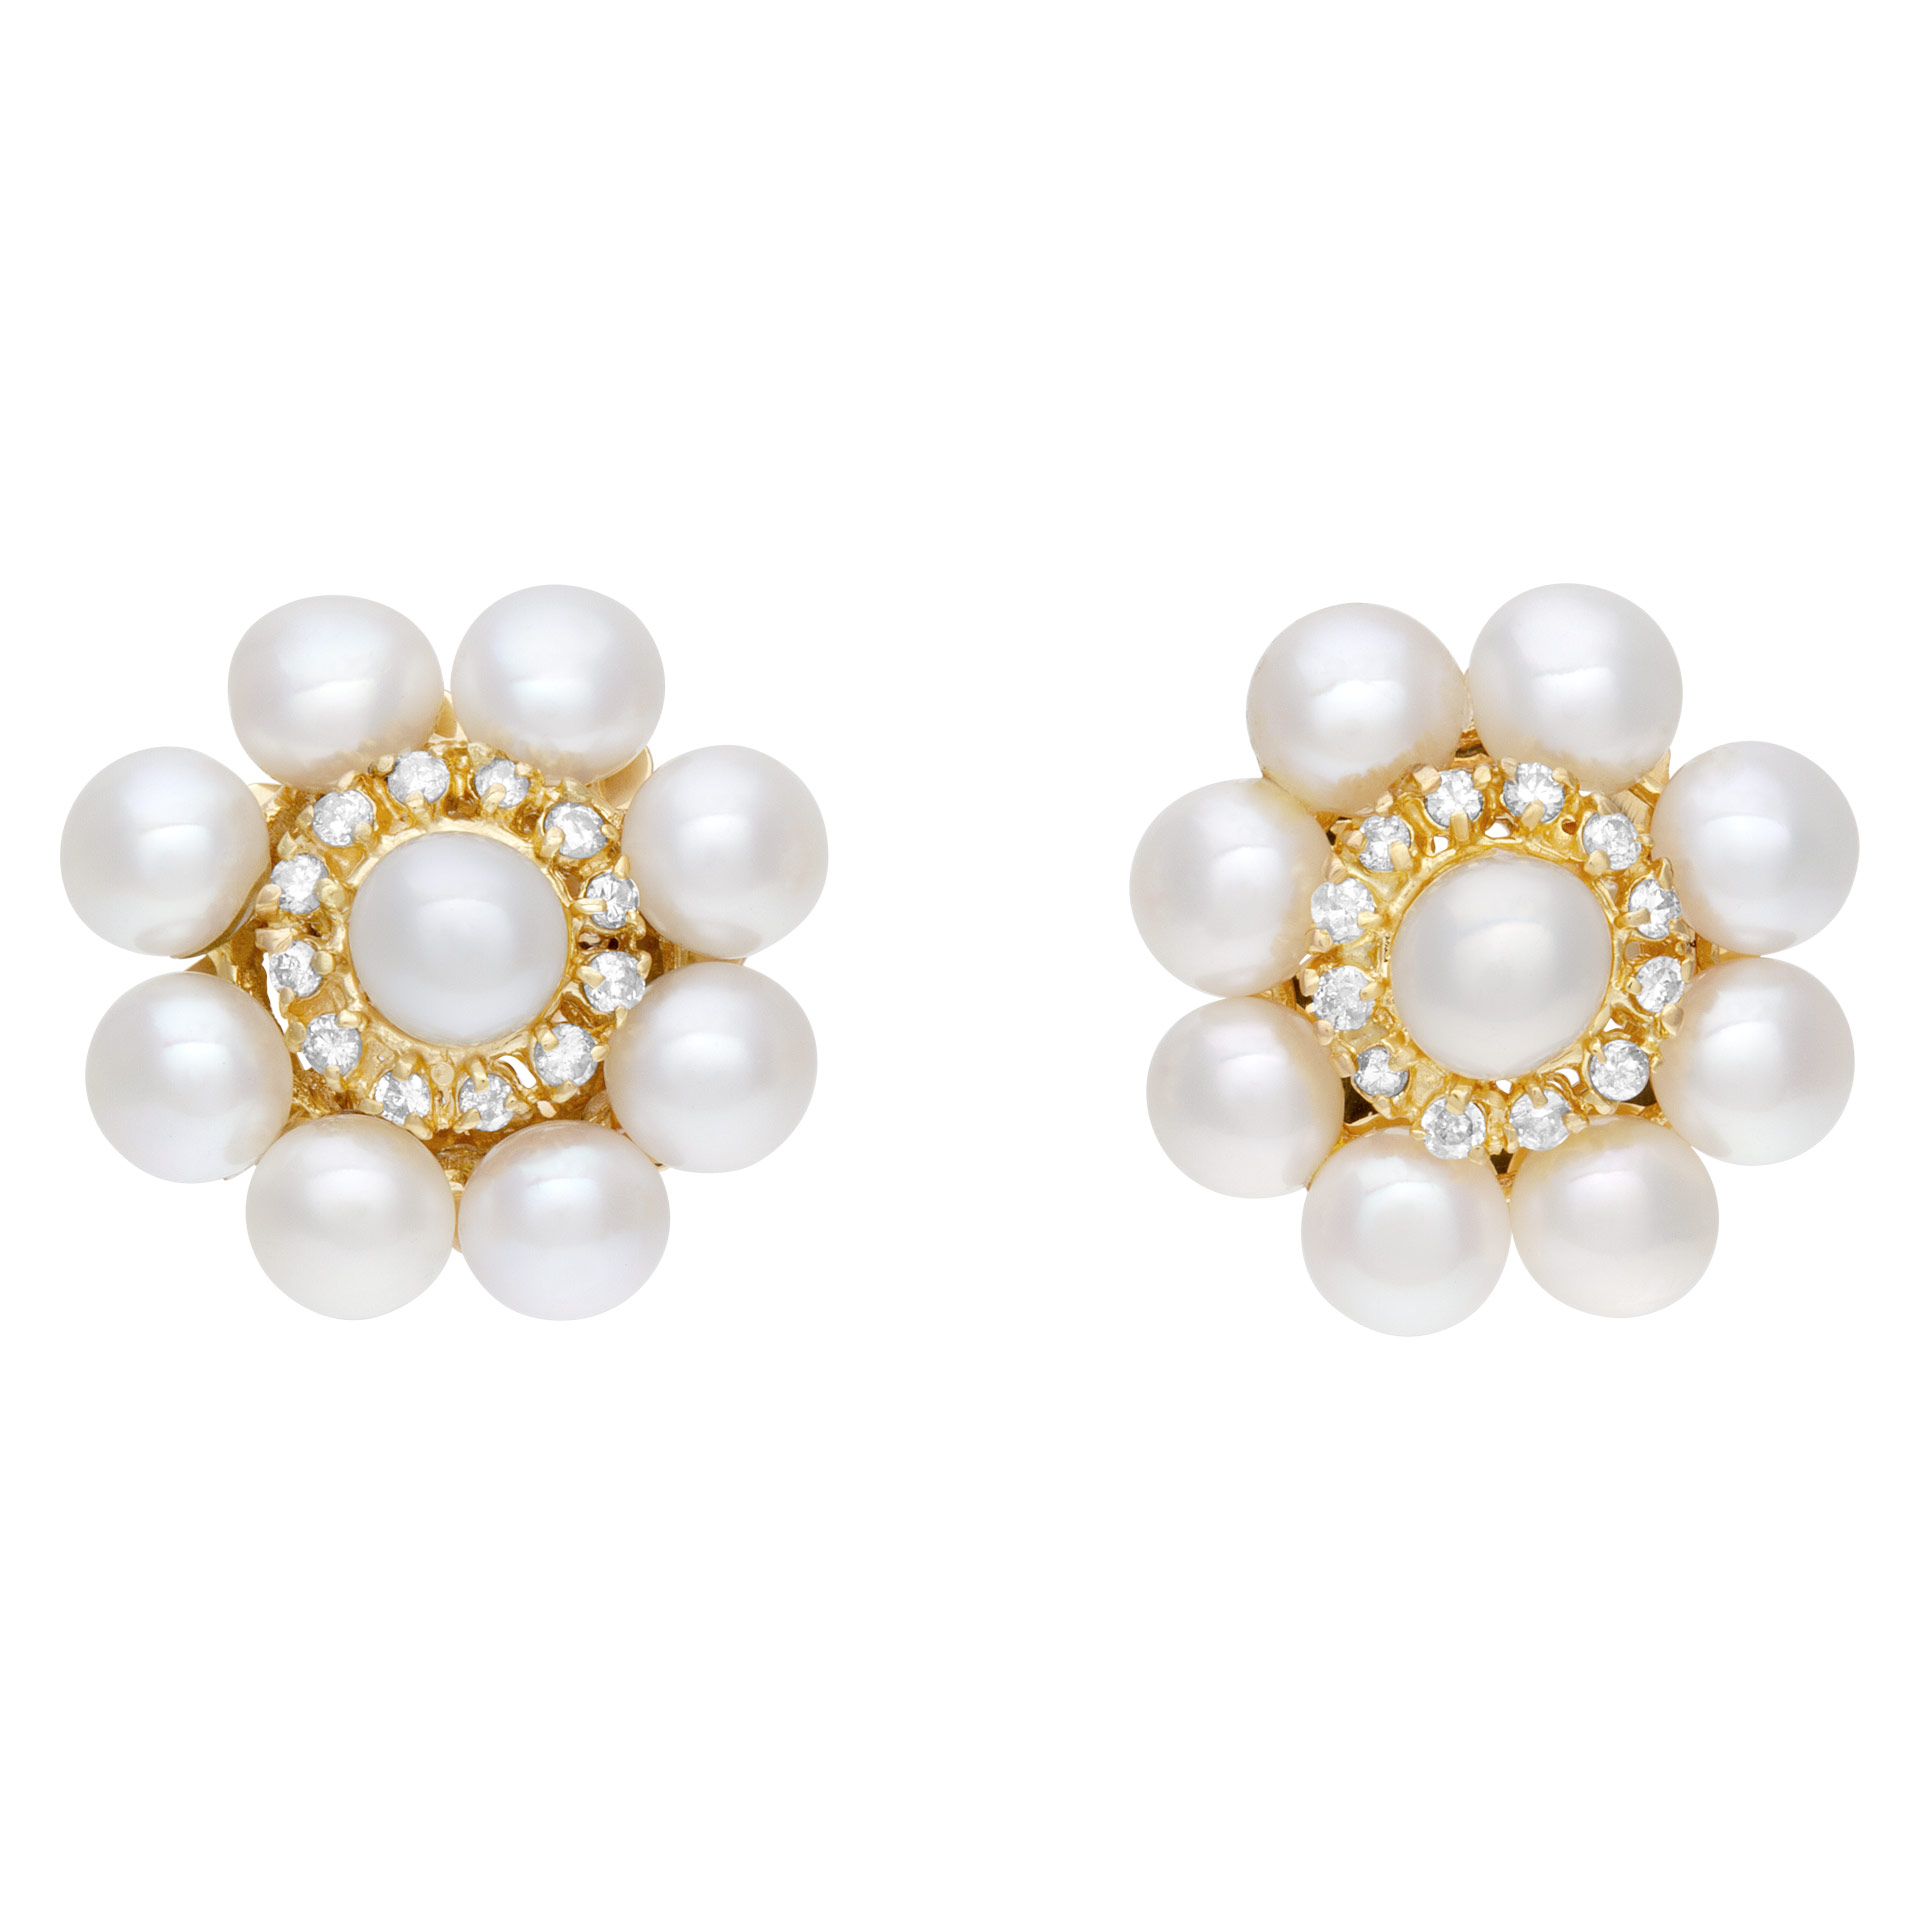 Elegant pair of  pearl earrings with diamonds accents, set in 18K yellow gold. 20mm diameter.